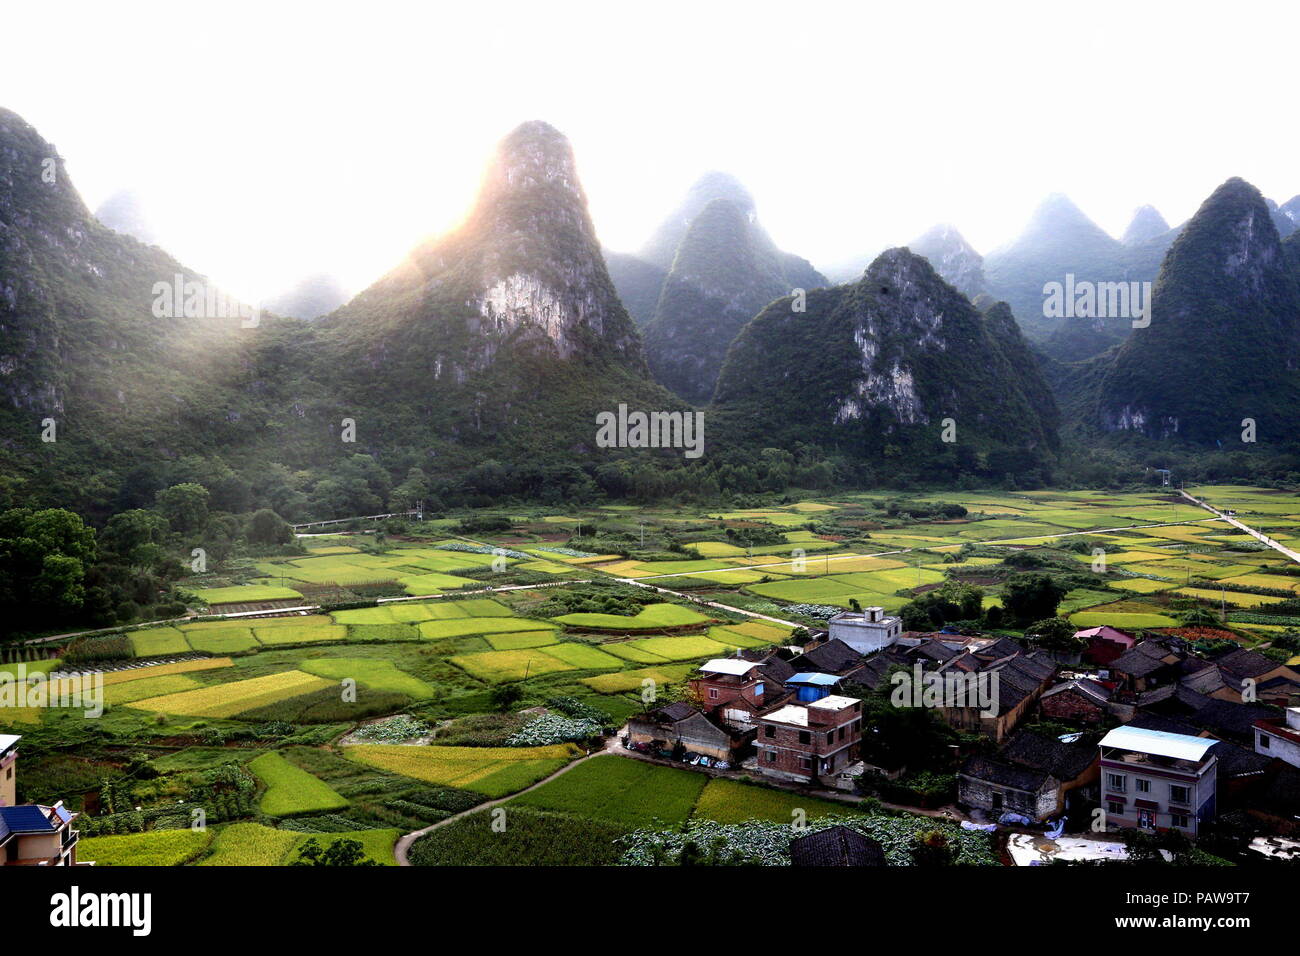 Guilin,Guangxi,China,25th July 2018.Early morning at a rice field in  Yanshan district near Yangshuo, Guilin city, China's Guangxi province.  Guilin had developed what was for that time a highly organized tourism  sector, receiving